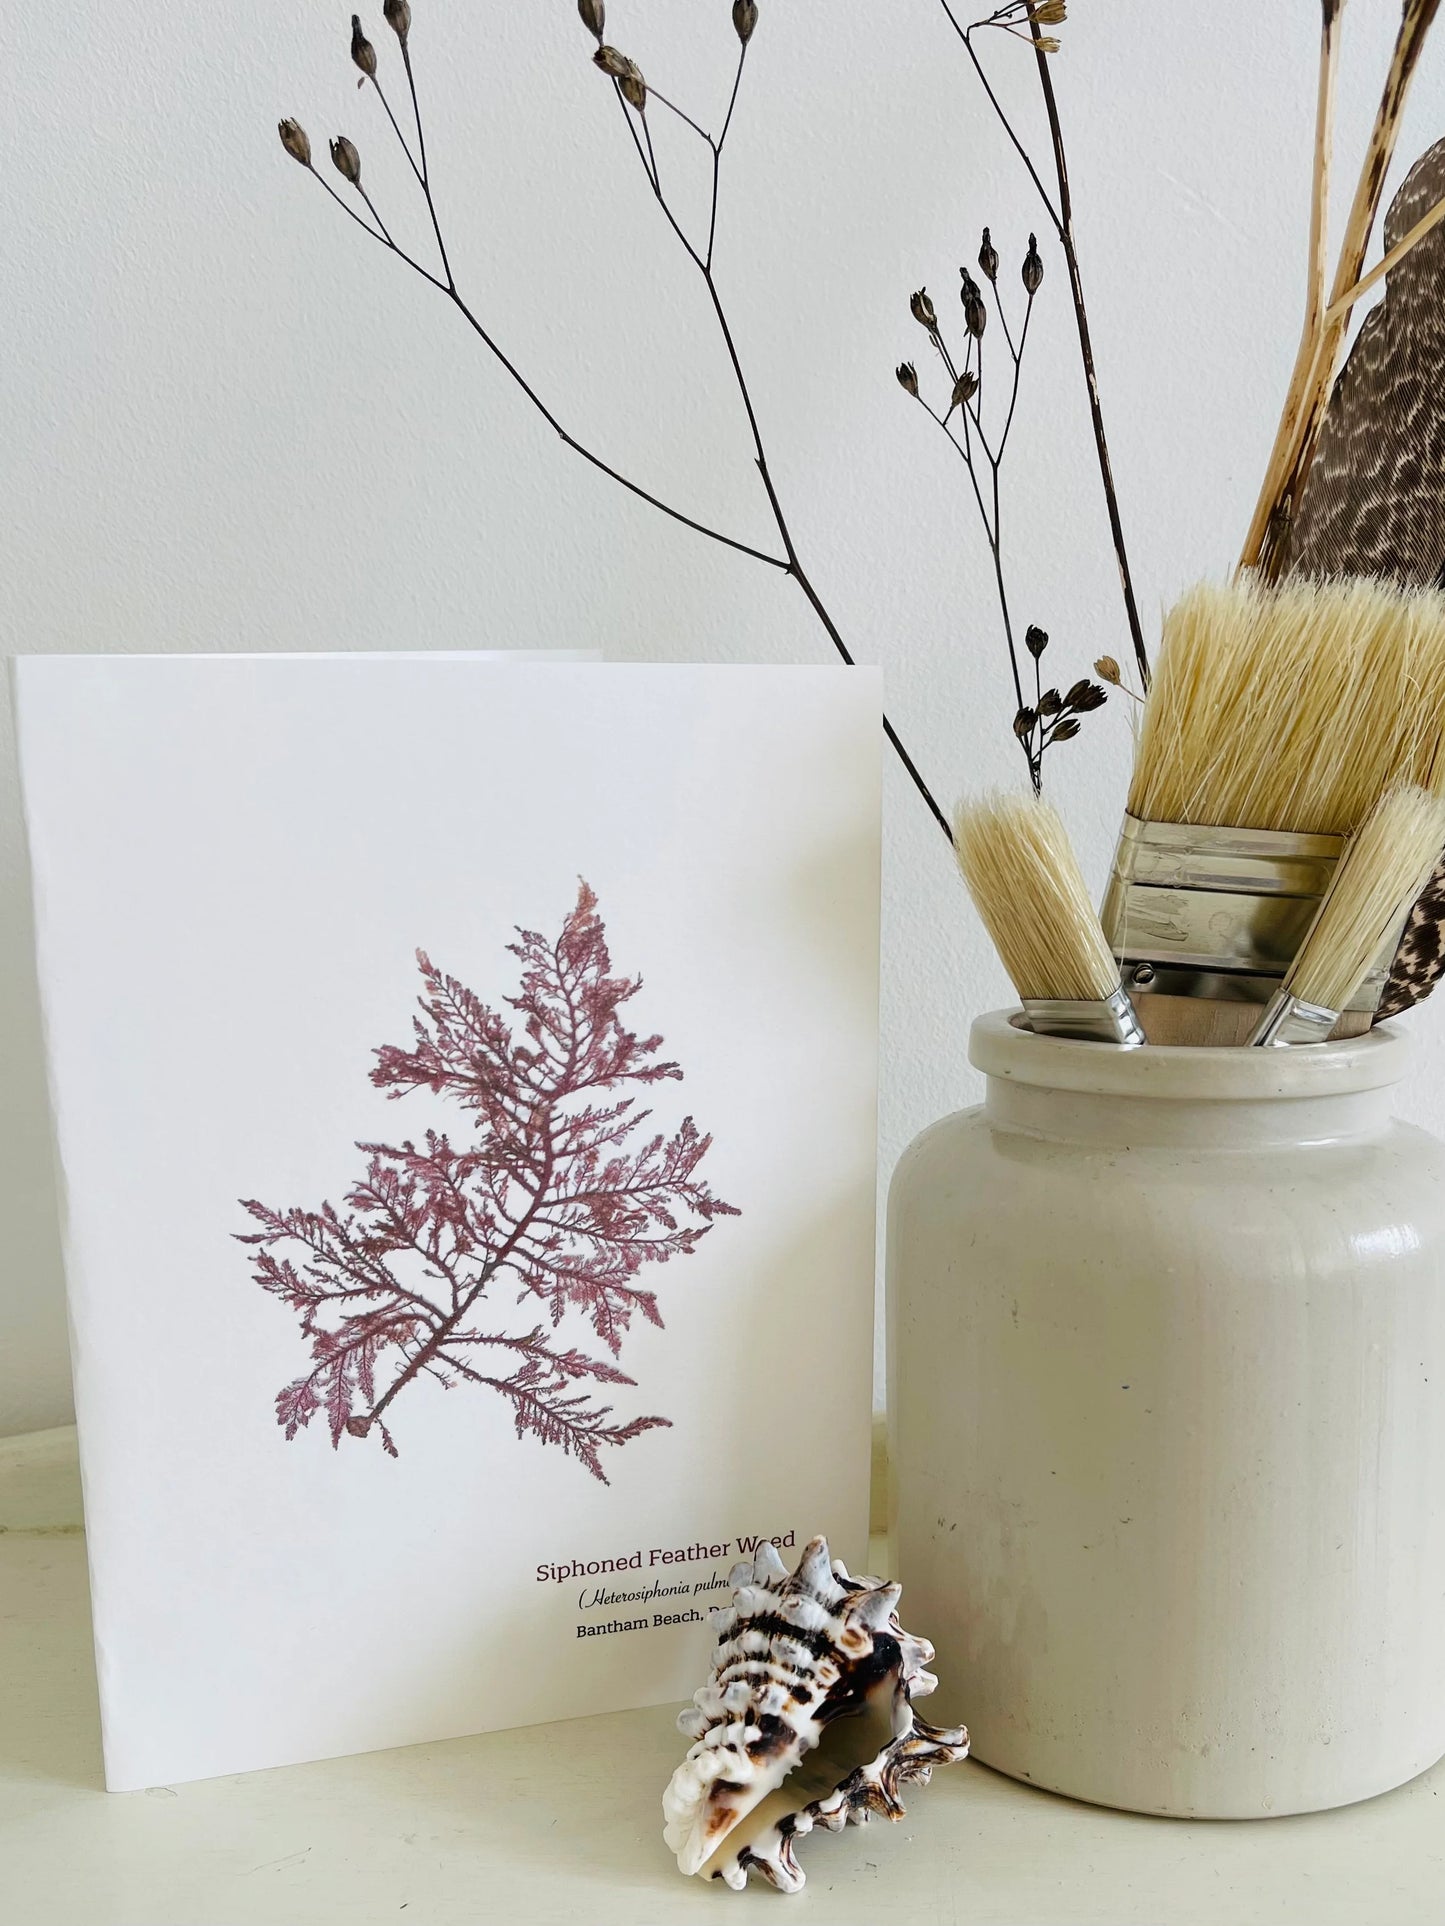 Siphoned Feather Weed Seaweed Greeting Card